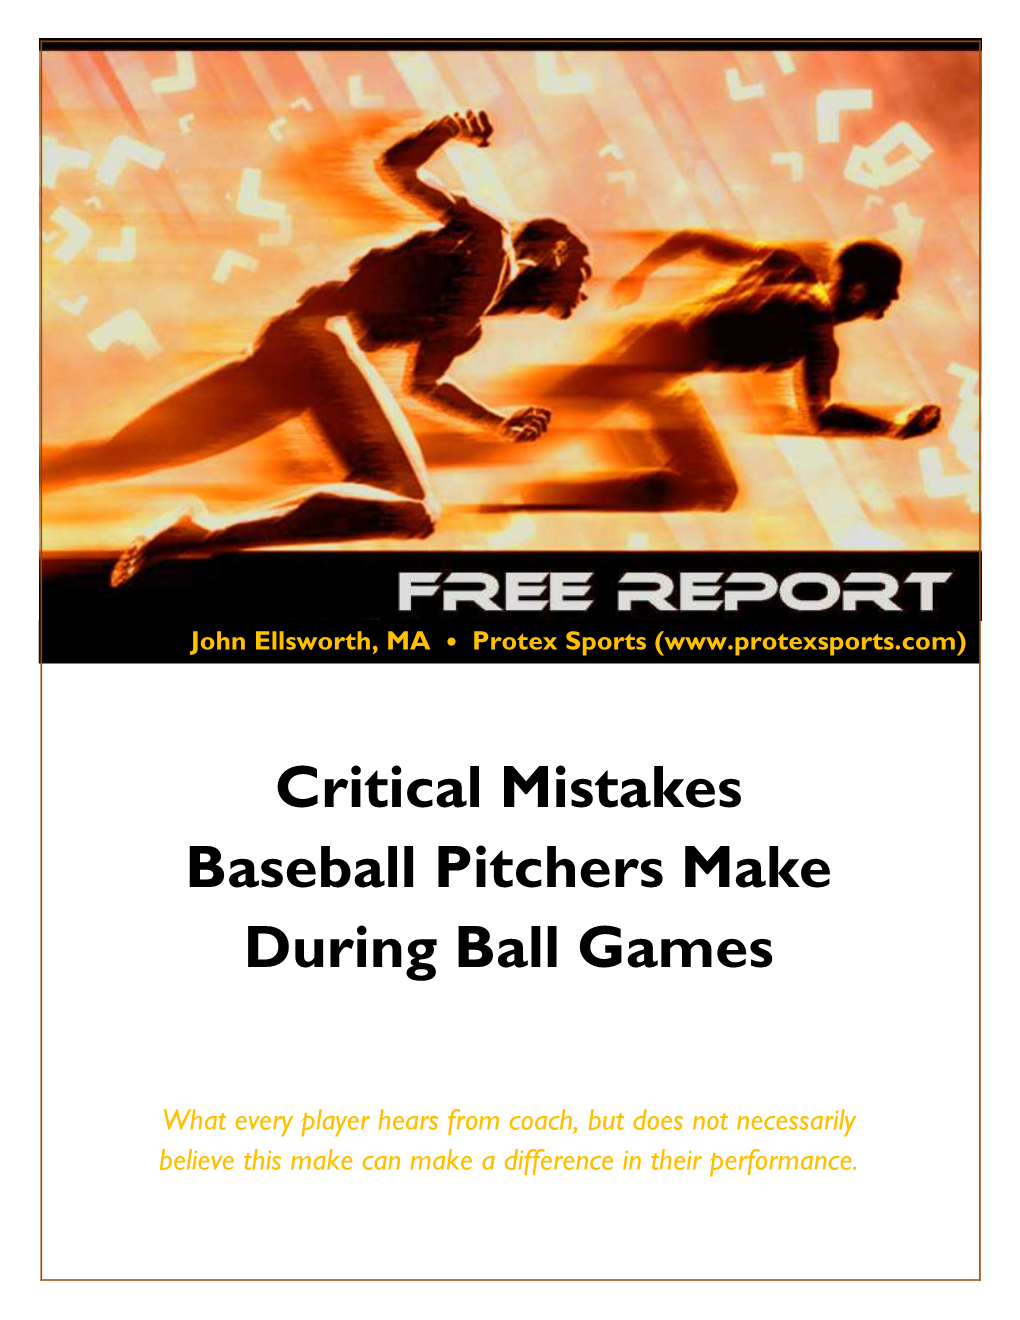 Critical Mistakes Baseball Pitchers Make During Ball Games